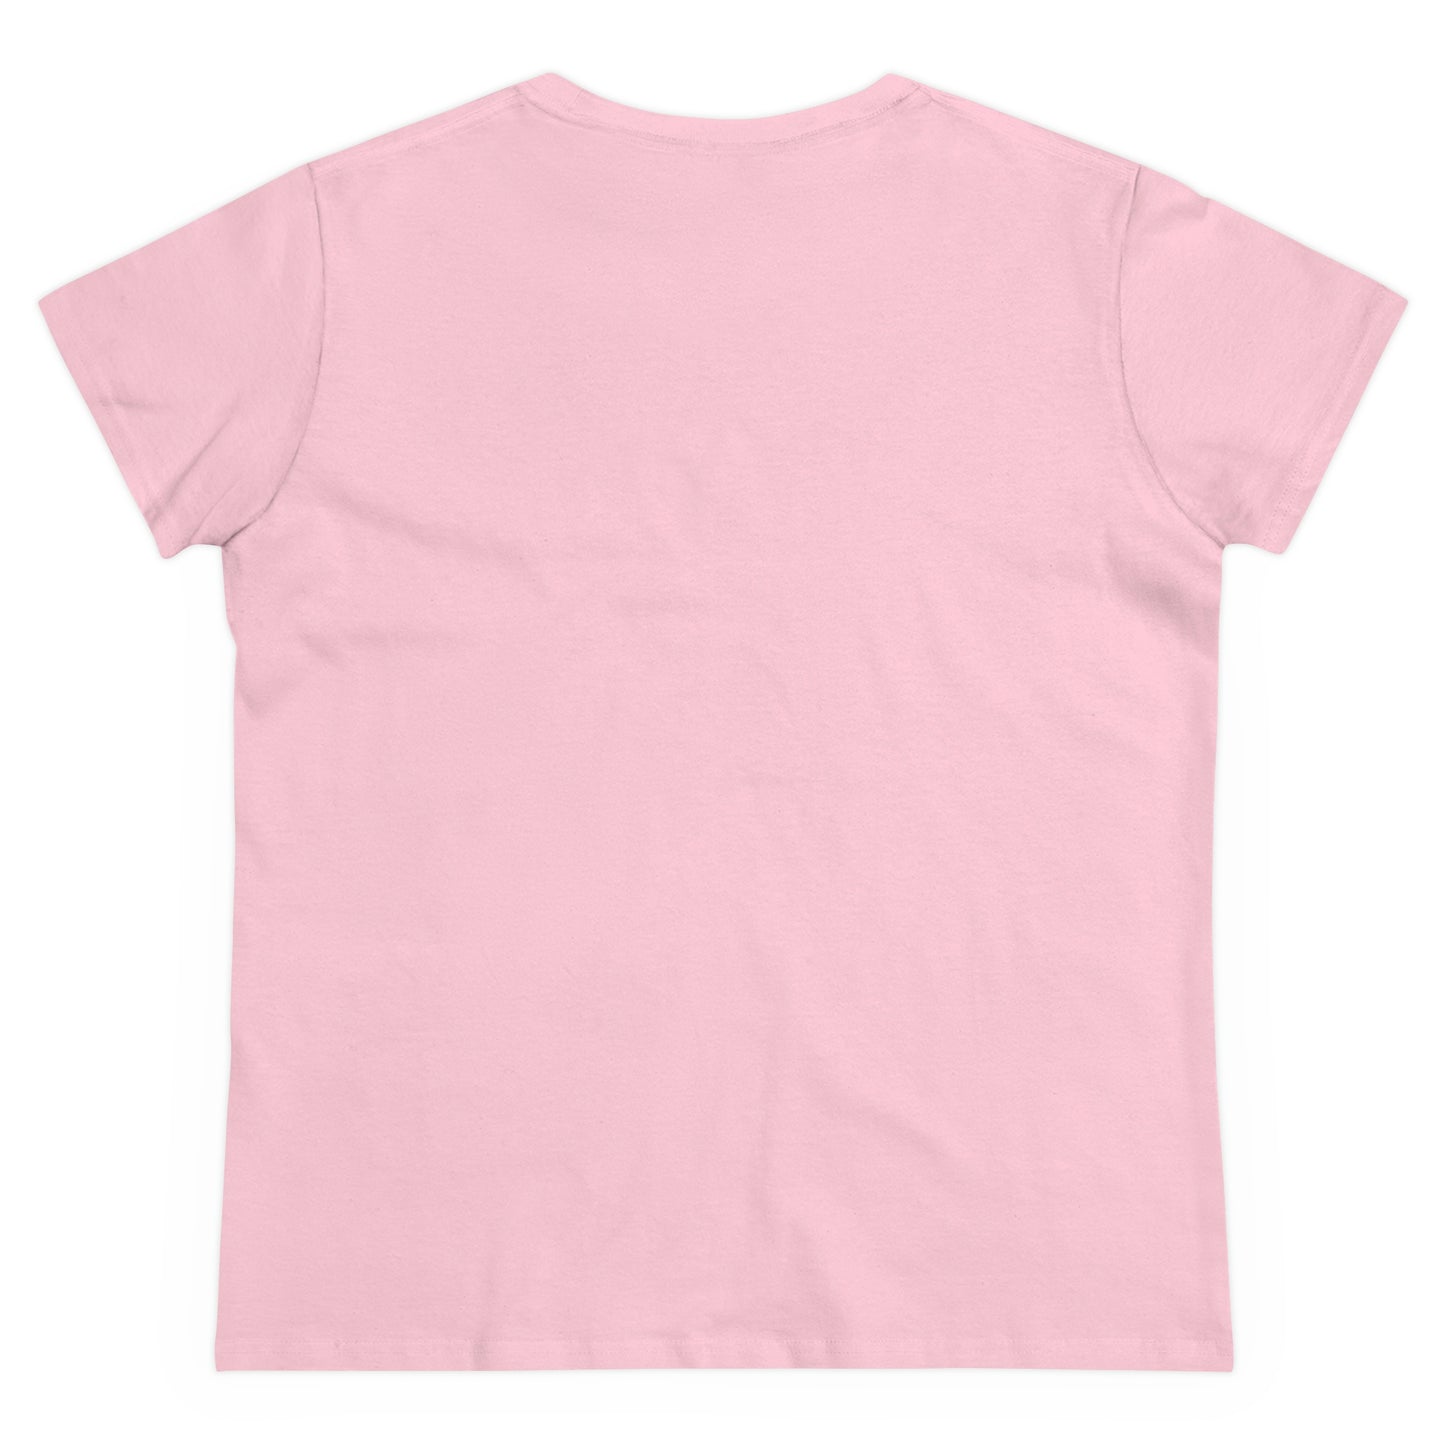 Flat back view of the pink shirt